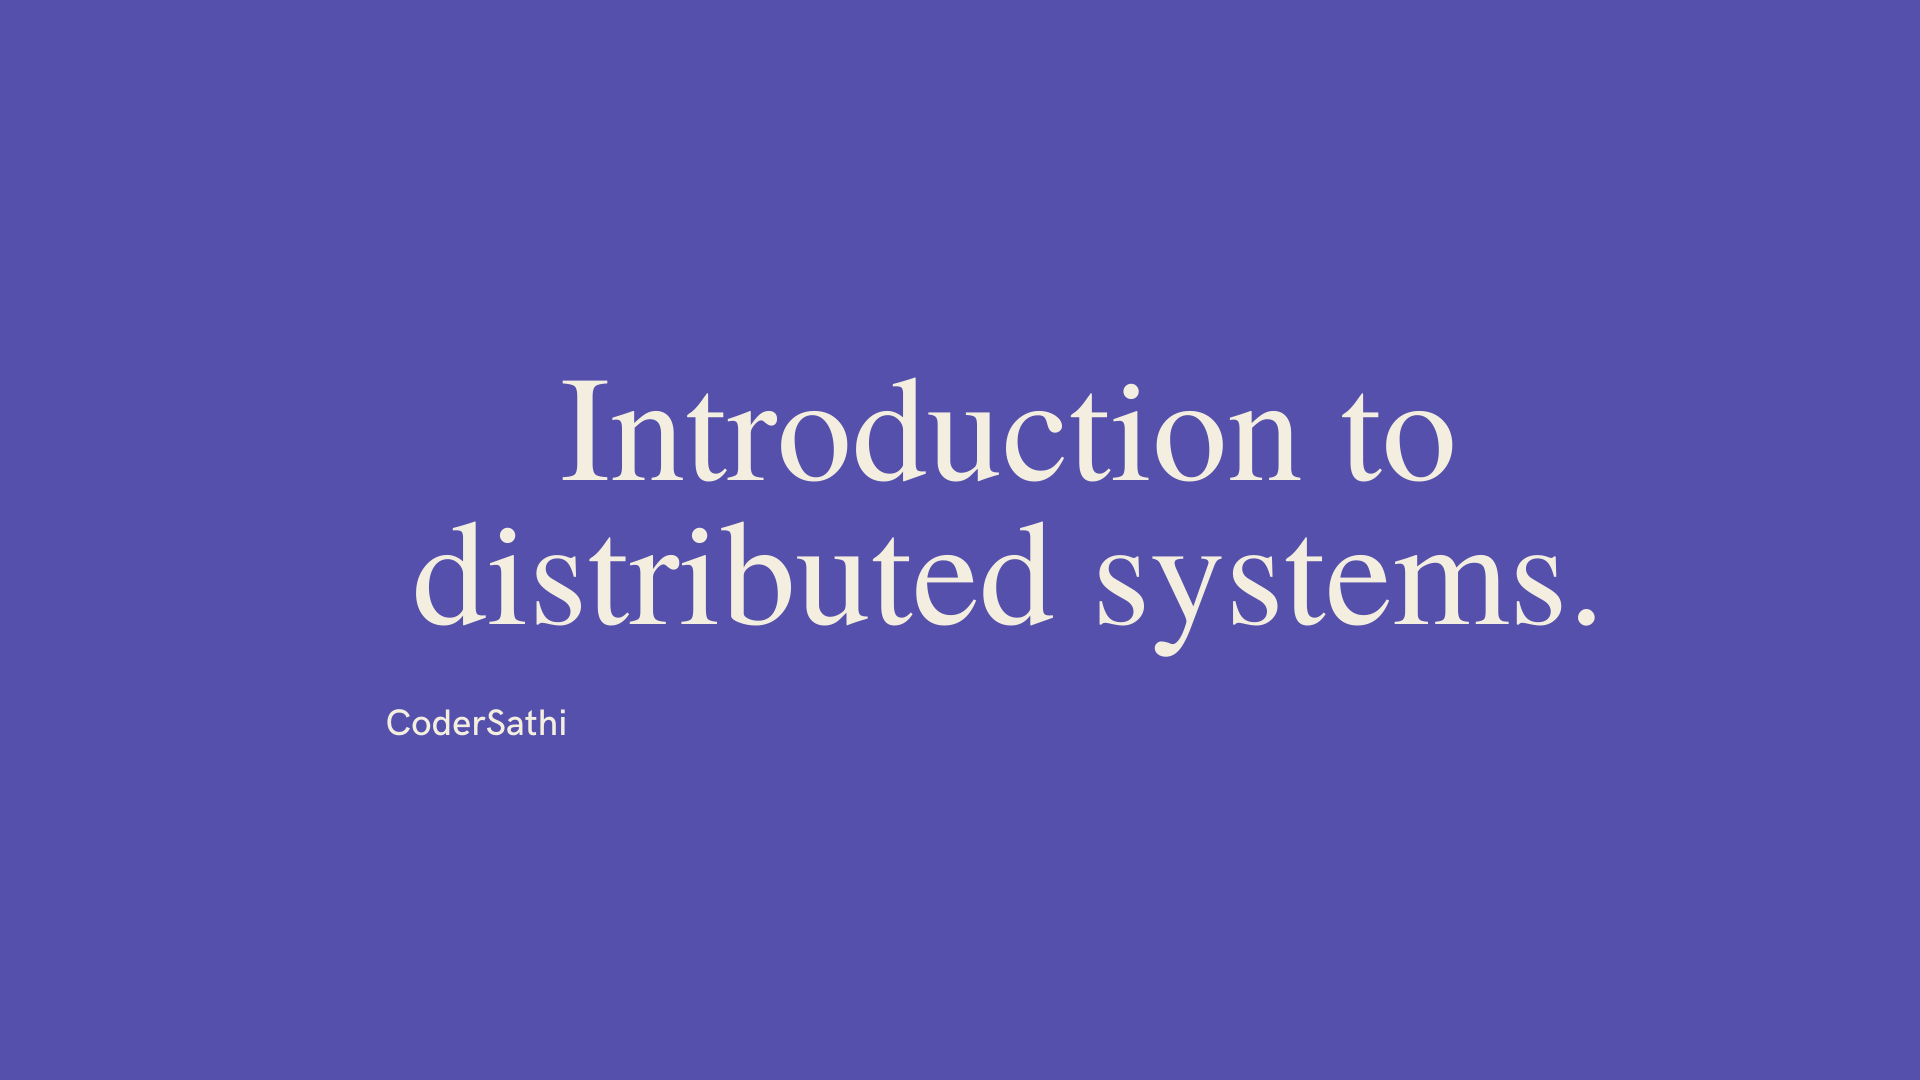 Distribute systems